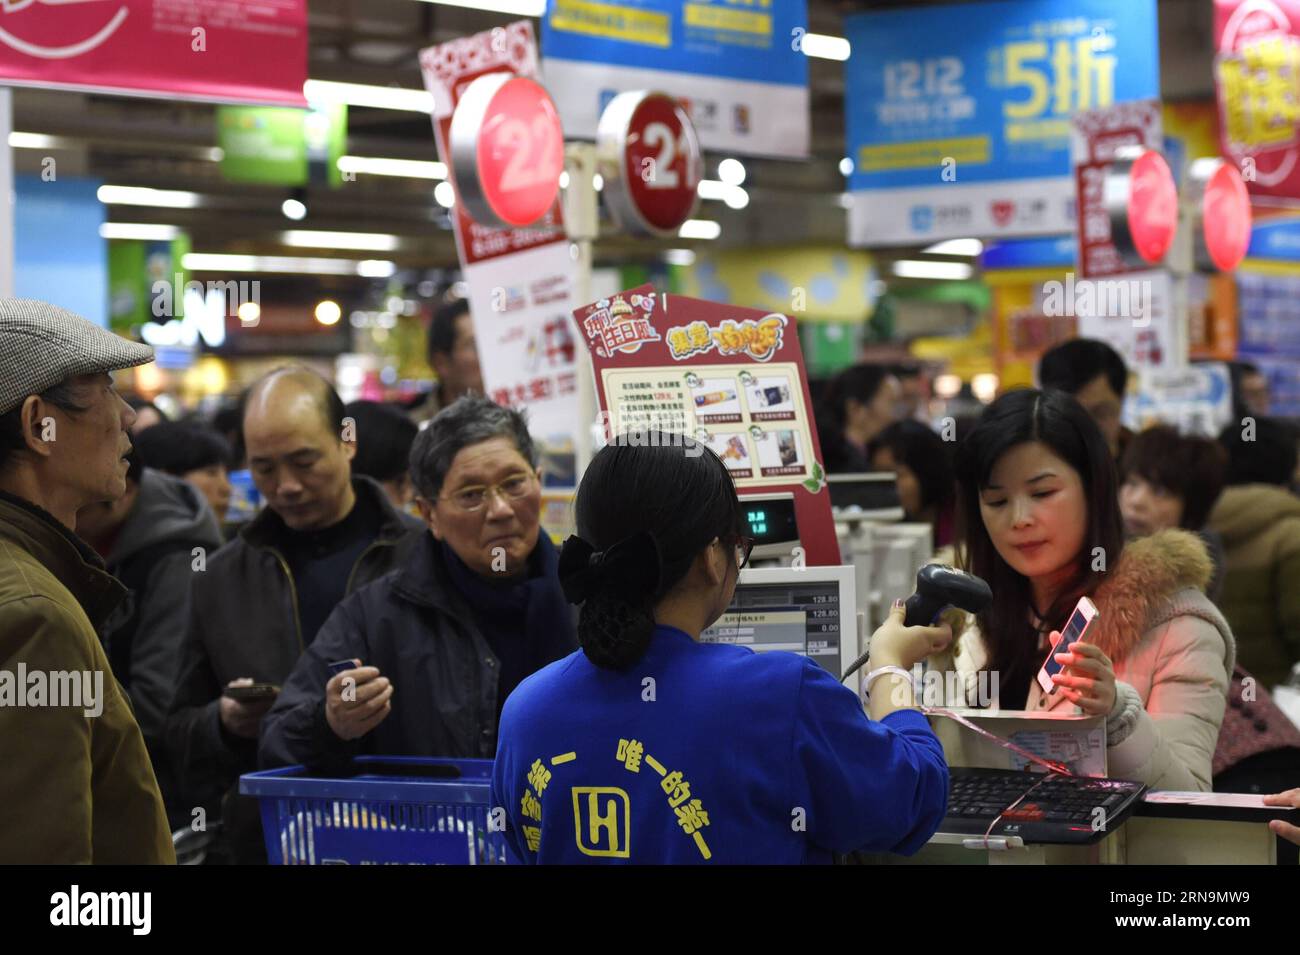 (151212) -- HANGZHOU, Dec. 12, 2015 -- A customer scans QR code to pay with Alipay at a supermarket in Hangzhou, capital of east China s Zhejiang Province, Dec. 12, 2015. China s largest online payment platform Alipay and Koubei.com, both belongs to Alibaba Group, joined hands to promote an offline sales promotion, in which customers are entitled to enjoy discount with payment by Alipay. More than 300,000 offline merchants at home and abroad took part in the event. ) (lfj) CHINA-ALIBABA-OFFLINE PROMOTION (CN) JuxHuanzong PUBLICATIONxNOTxINxCHN   151212 Hangzhou DEC 12 2015 a Customer Scans QR Stock Photo